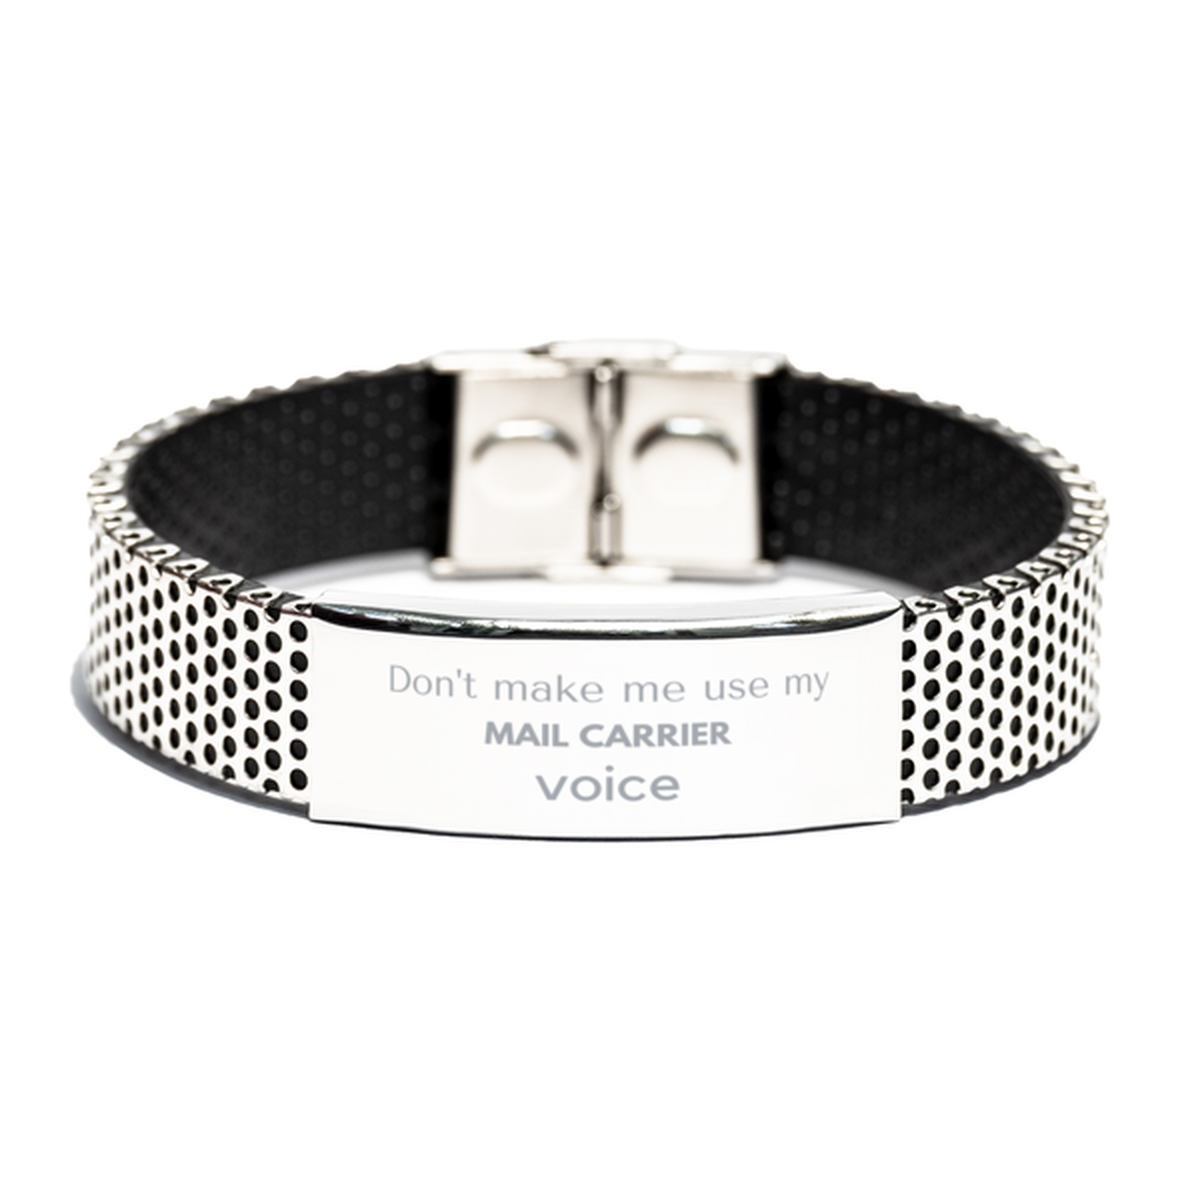 Don't make me use my Mail Carrier voice, Sarcasm Mail Carrier Gifts, Christmas Mail Carrier Stainless Steel Bracelet Birthday Unique Gifts For Mail Carrier Coworkers, Men, Women, Colleague, Friends